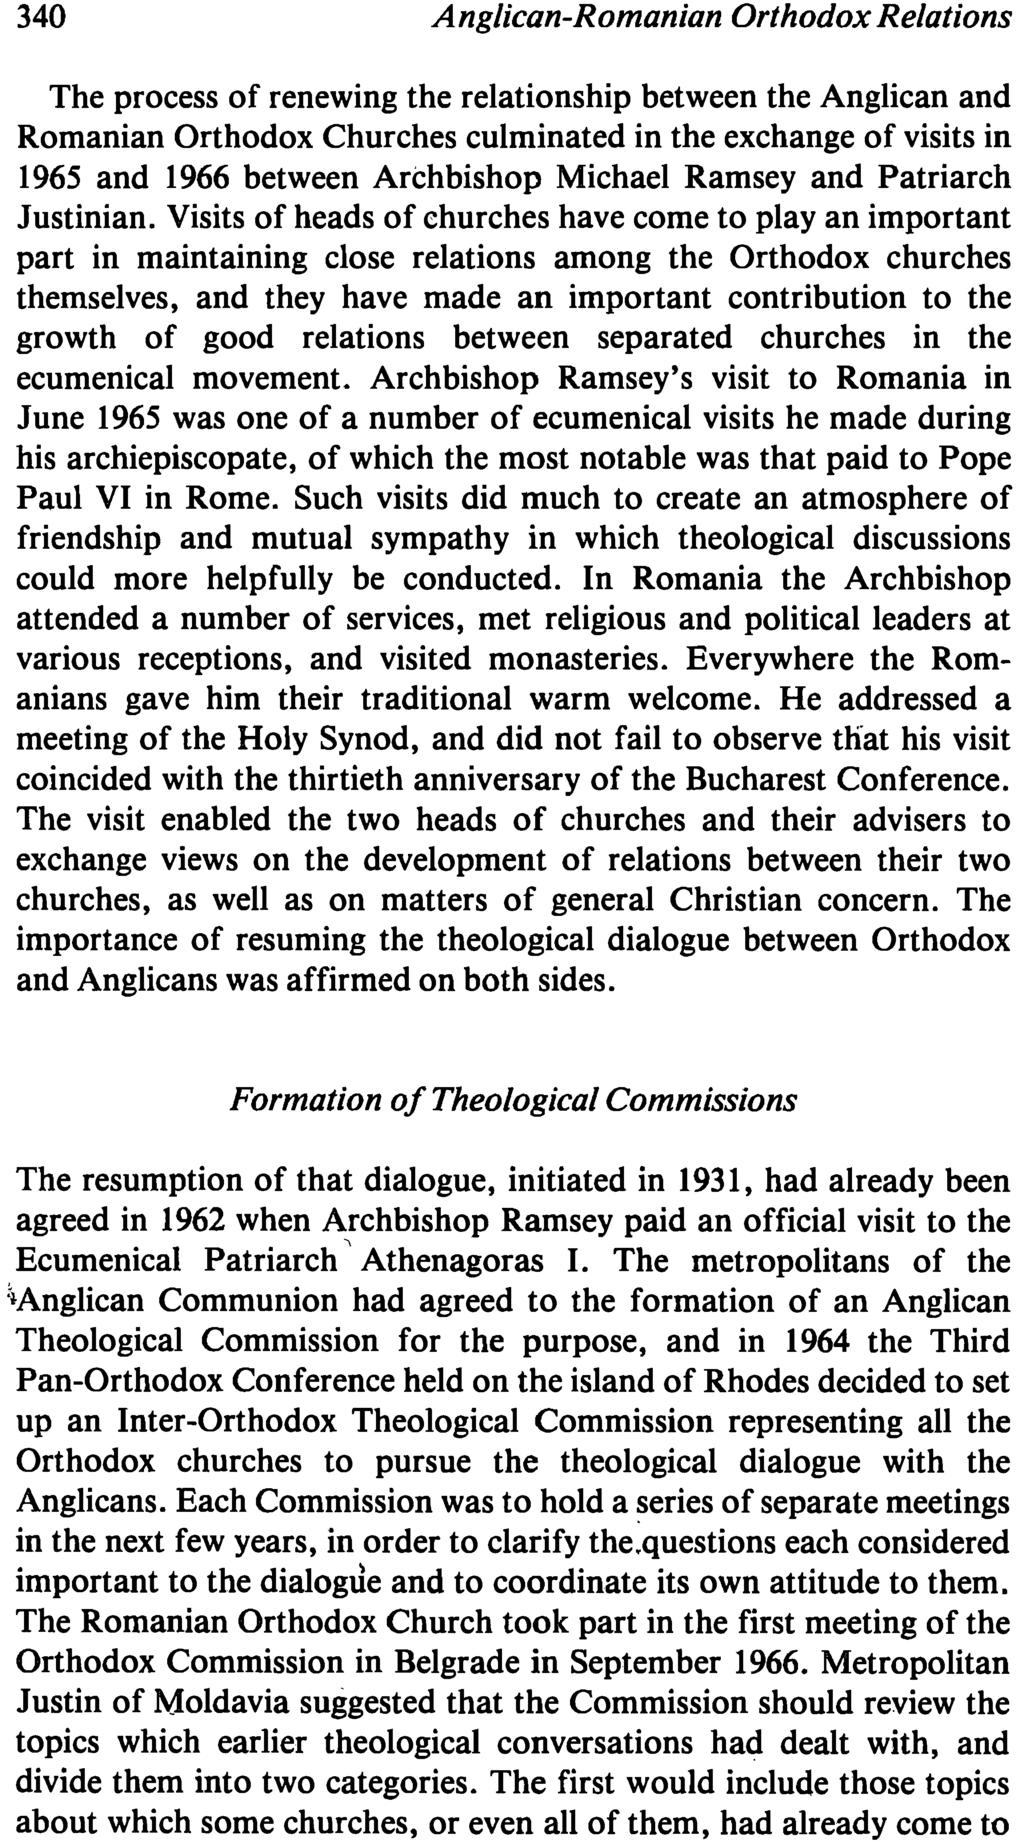 340 Anglican-Romanian Orthodox Relations The process of renewing the relationship between the Anglican and Romanian Orthodox Churches culminated in the exchange of visits in 1965 and 1966 between